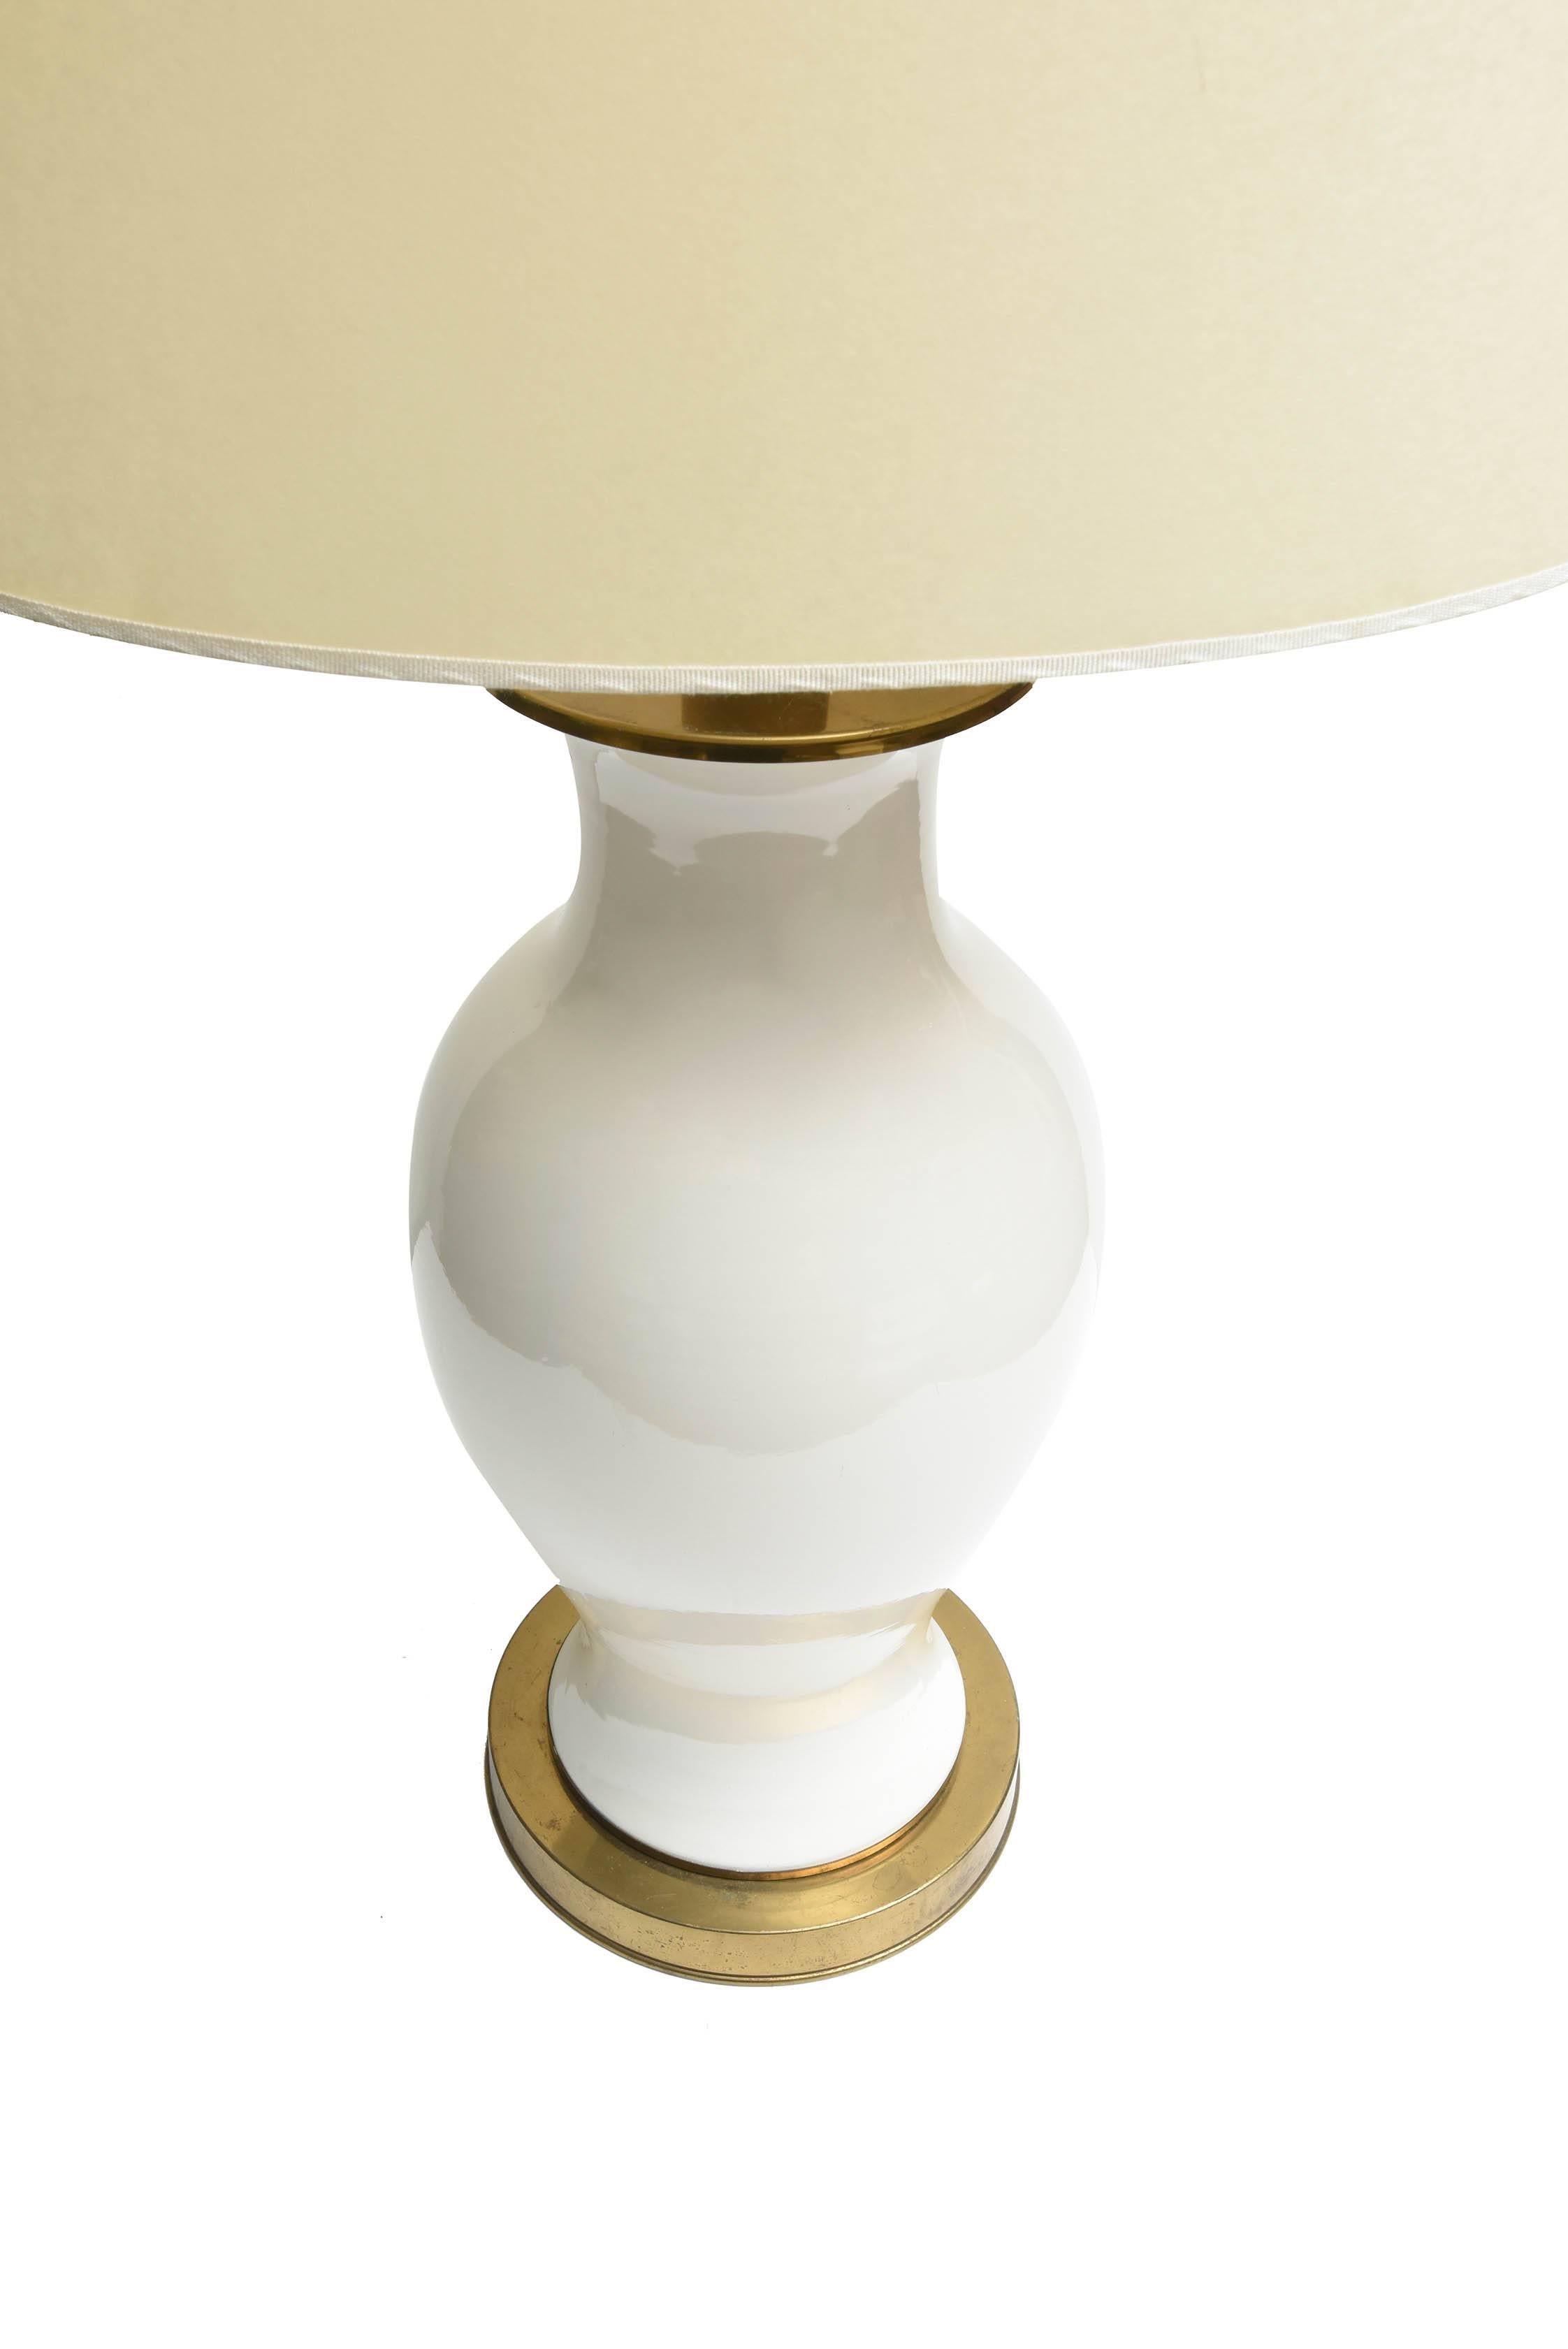 20th Century Brass and Ceramic Table Lamp For Sale